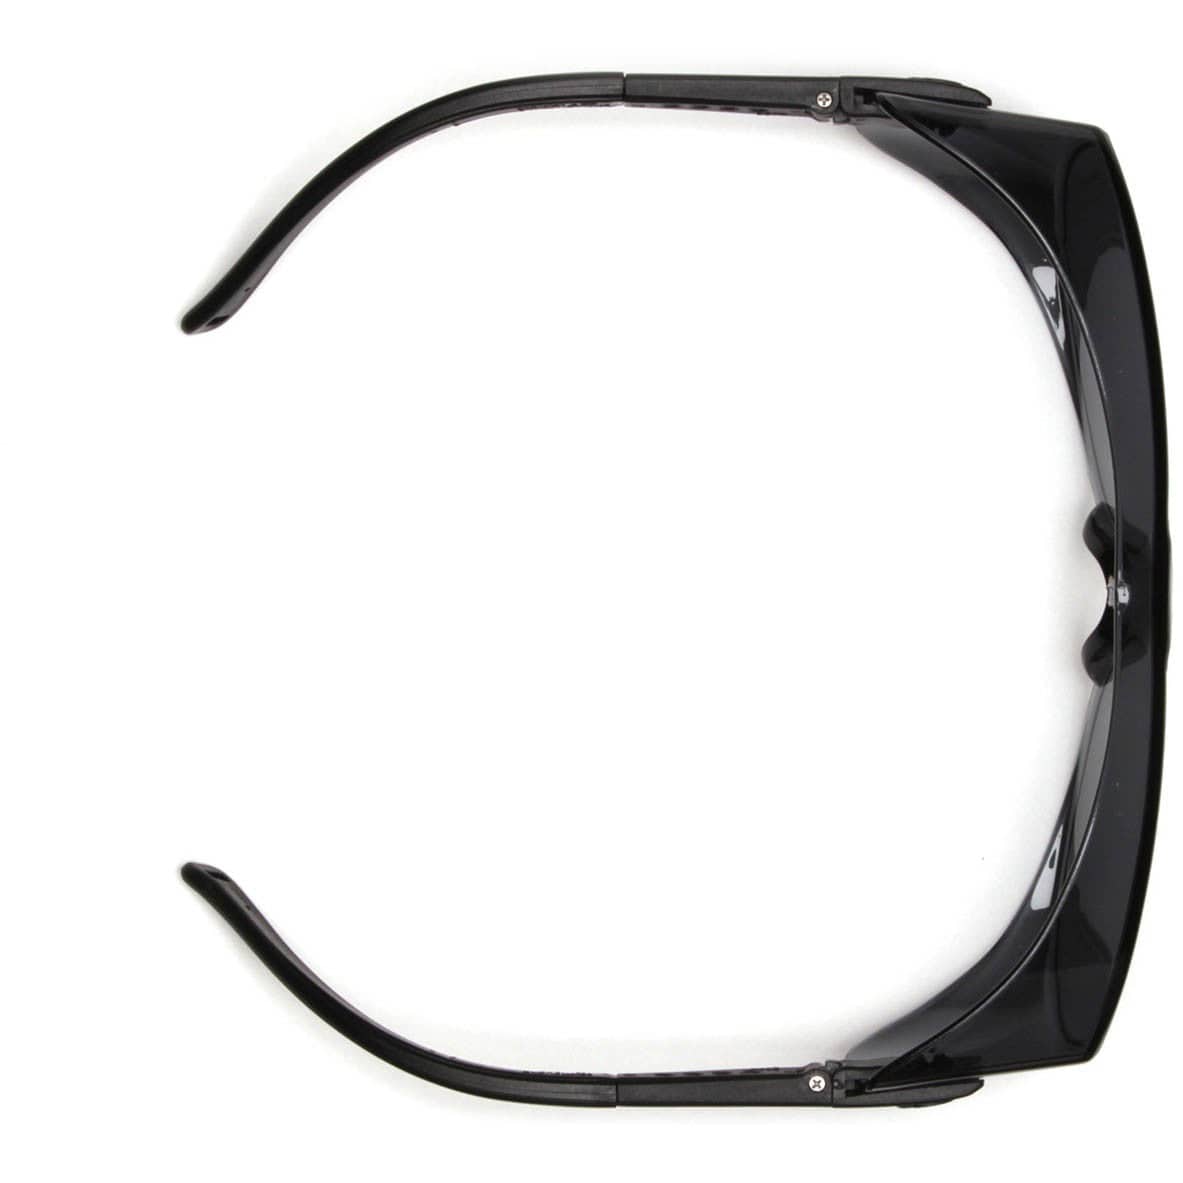 Pyramex S3520SJ OTS Safety Glasses Black Temples Gray Lens Top View